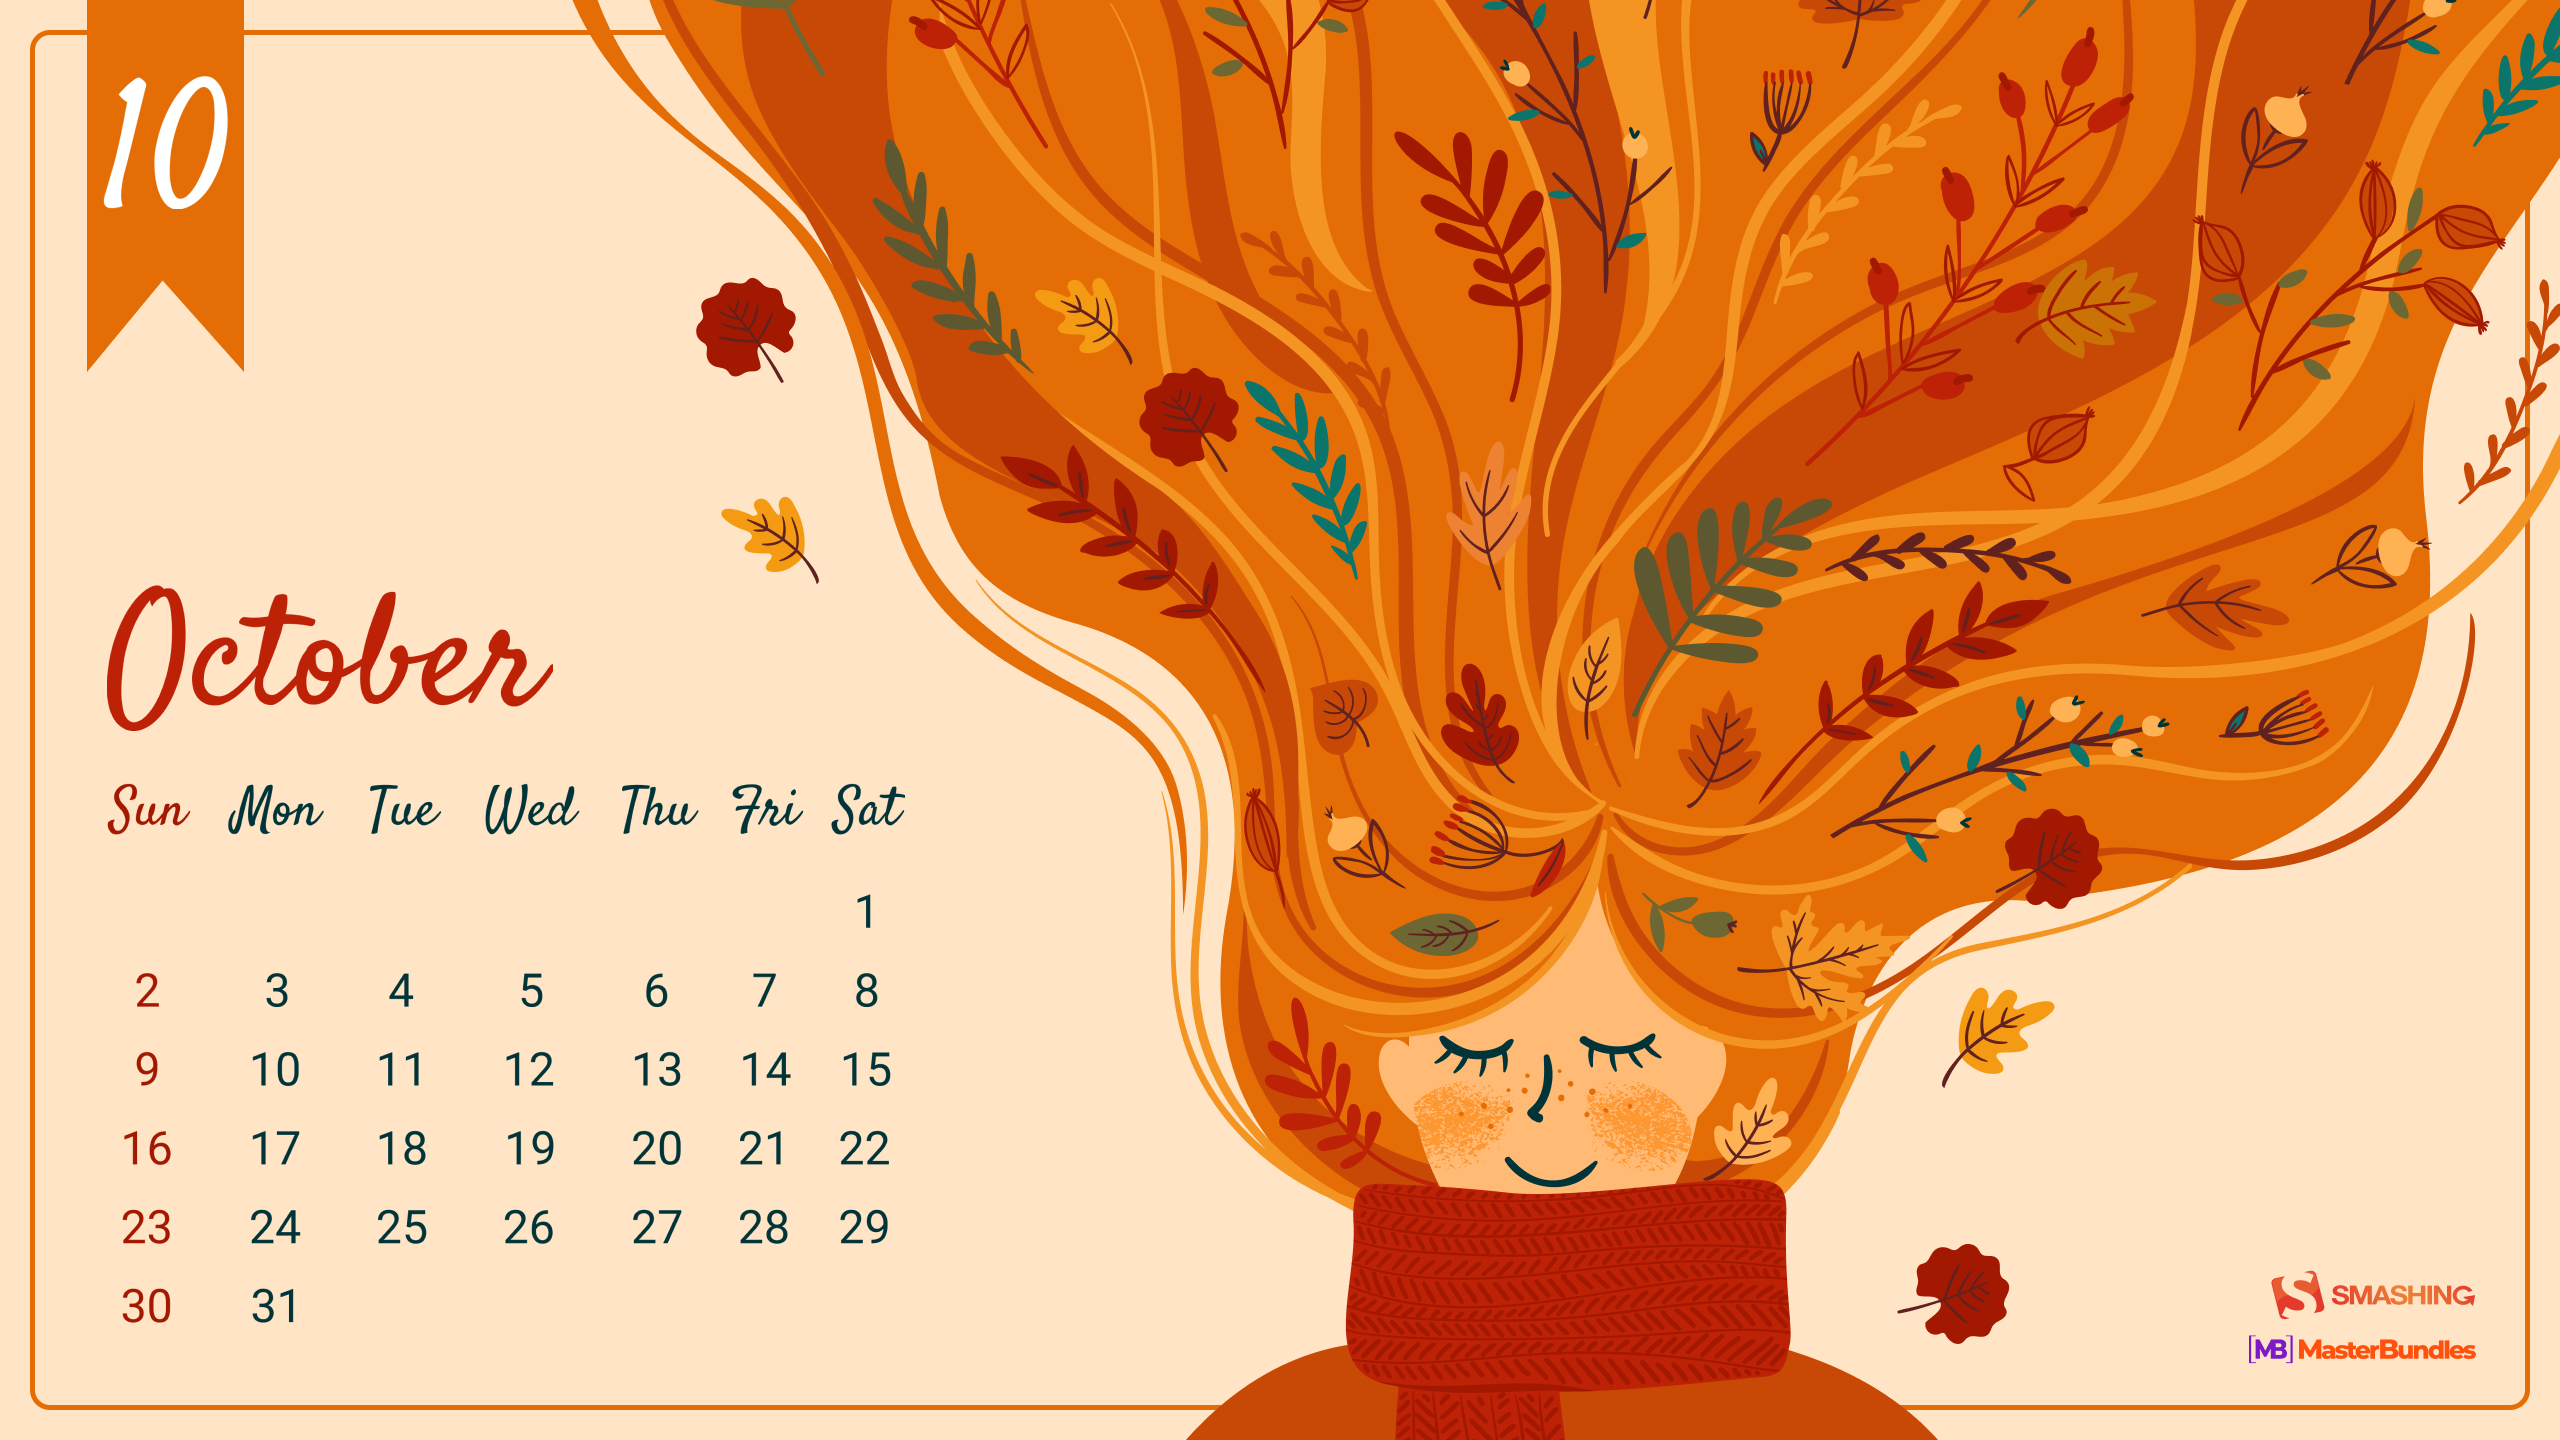 October vibes for your desktop wallpapers edition â smashing magazine